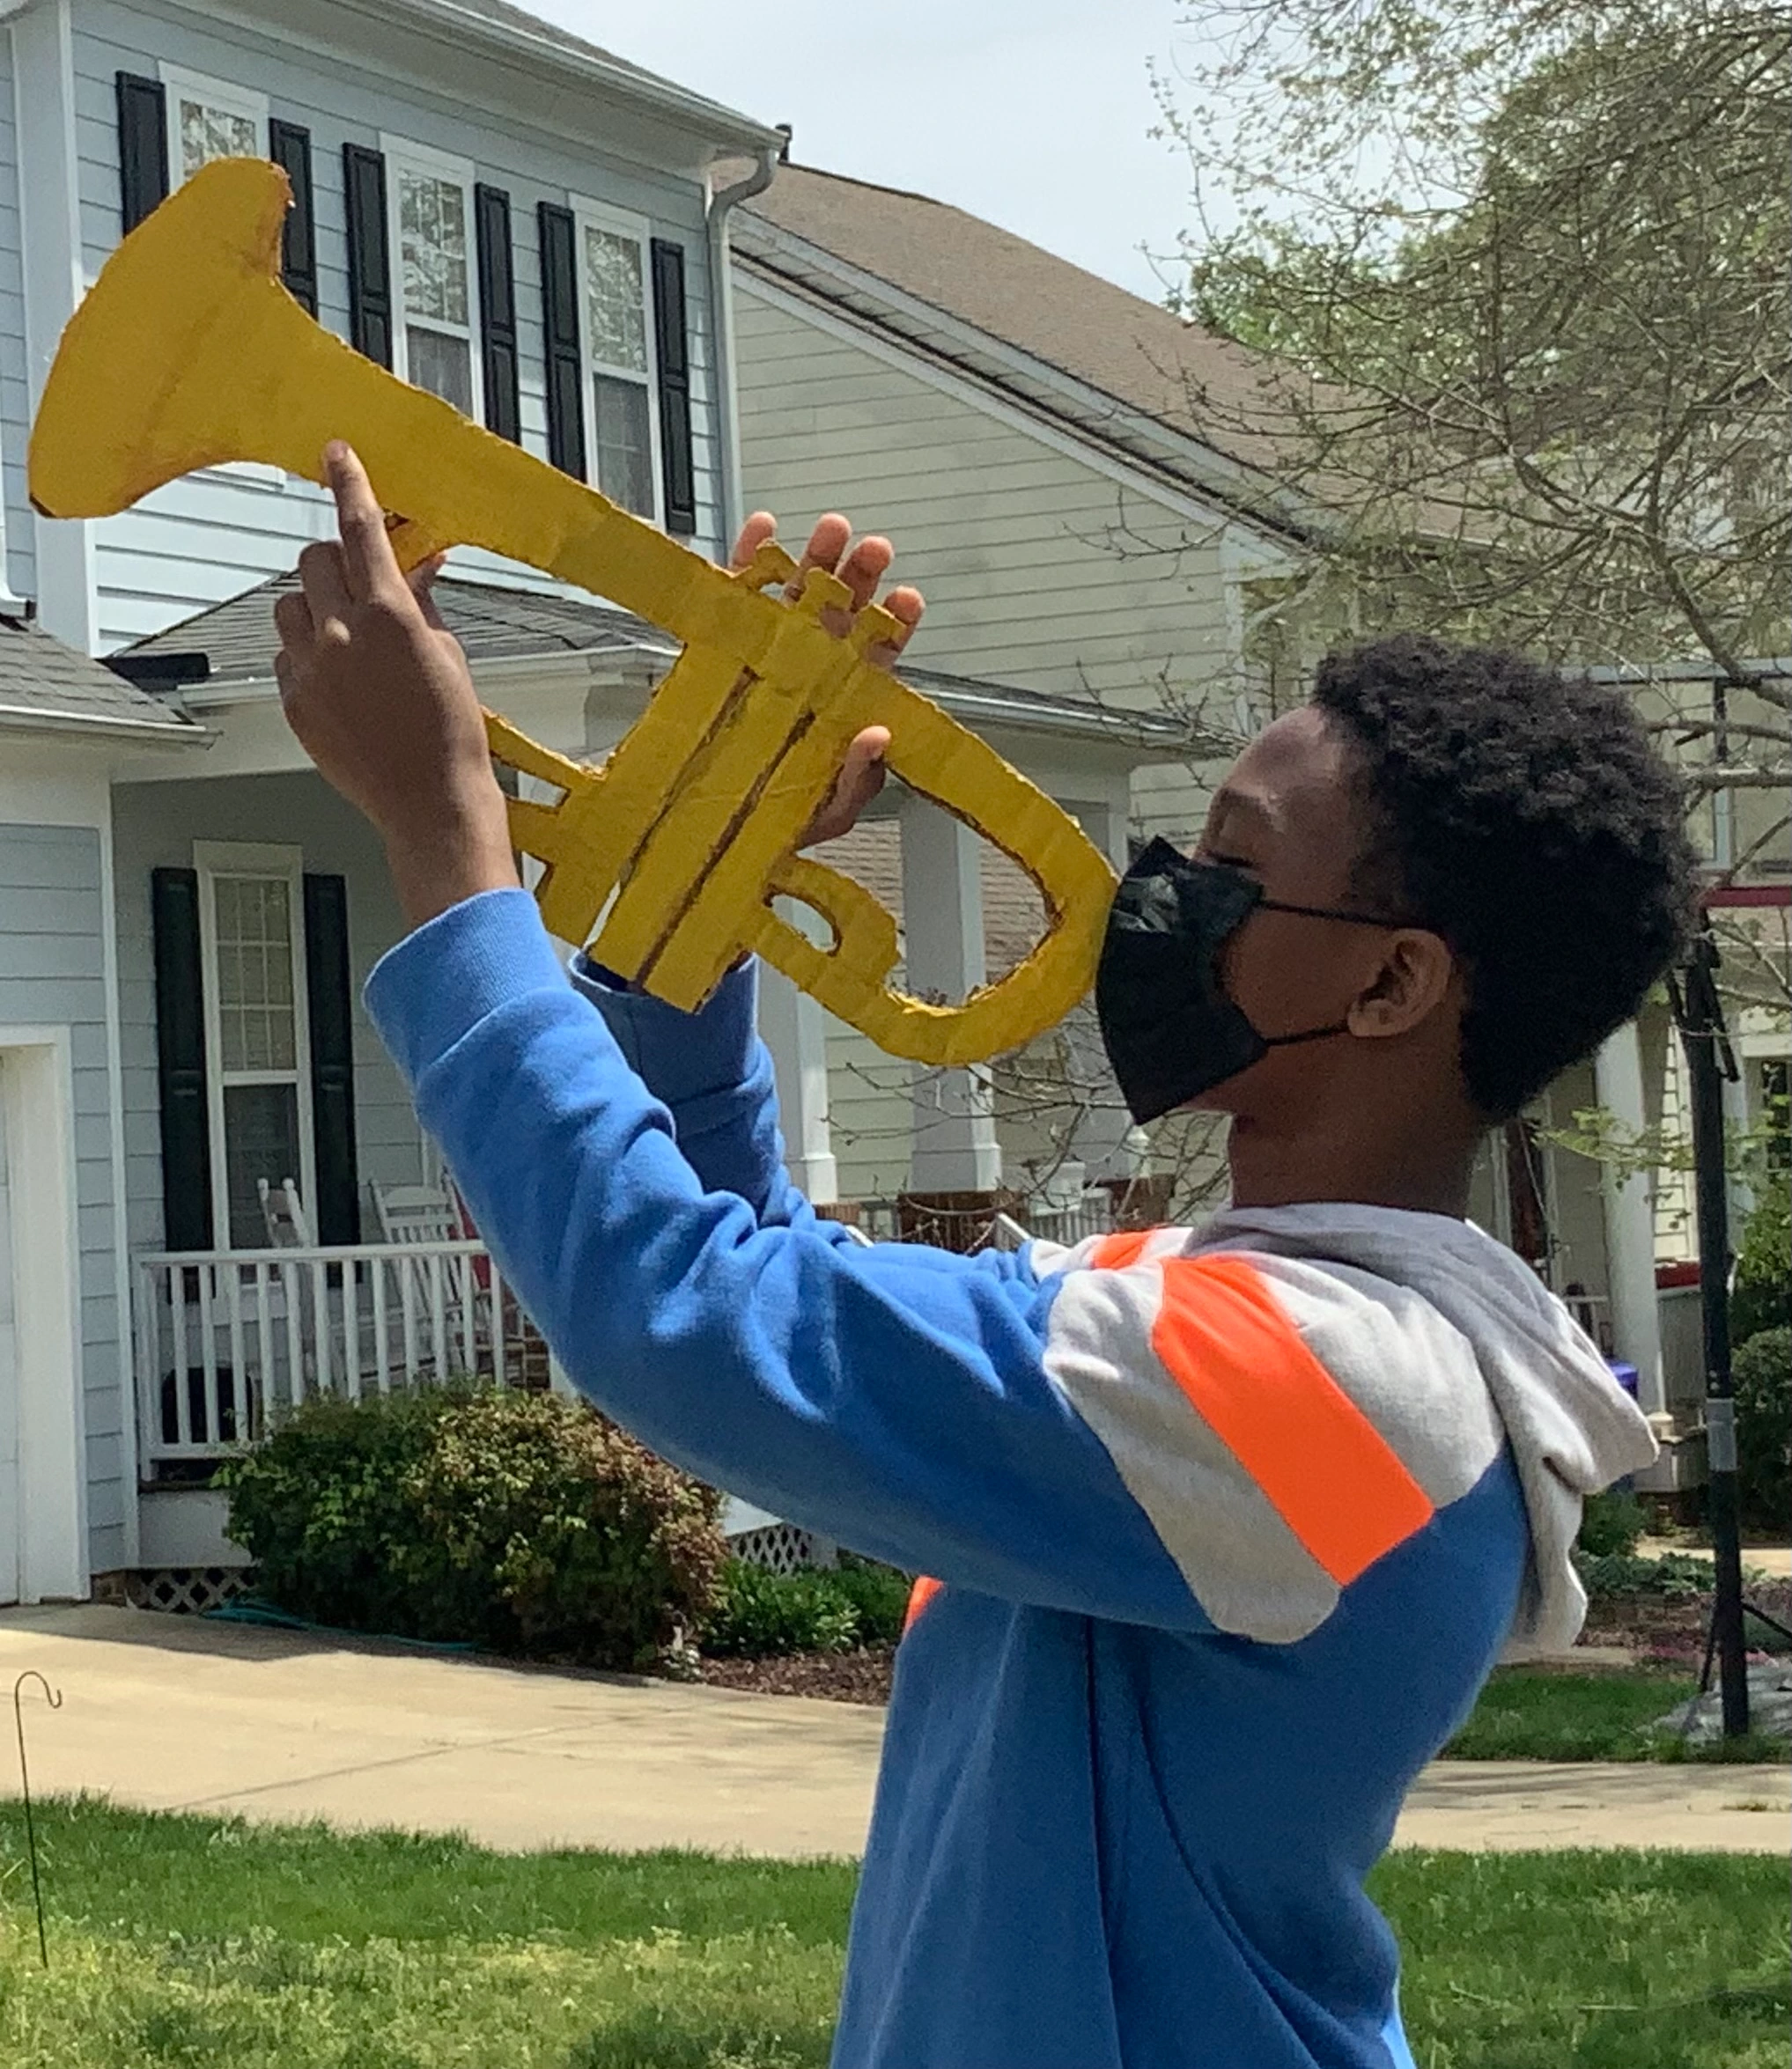 Tarin of 1,2,3 Puppetry playing trumpet for The Time We Have staging and rehearsal April 16, 2022 Ramirez home